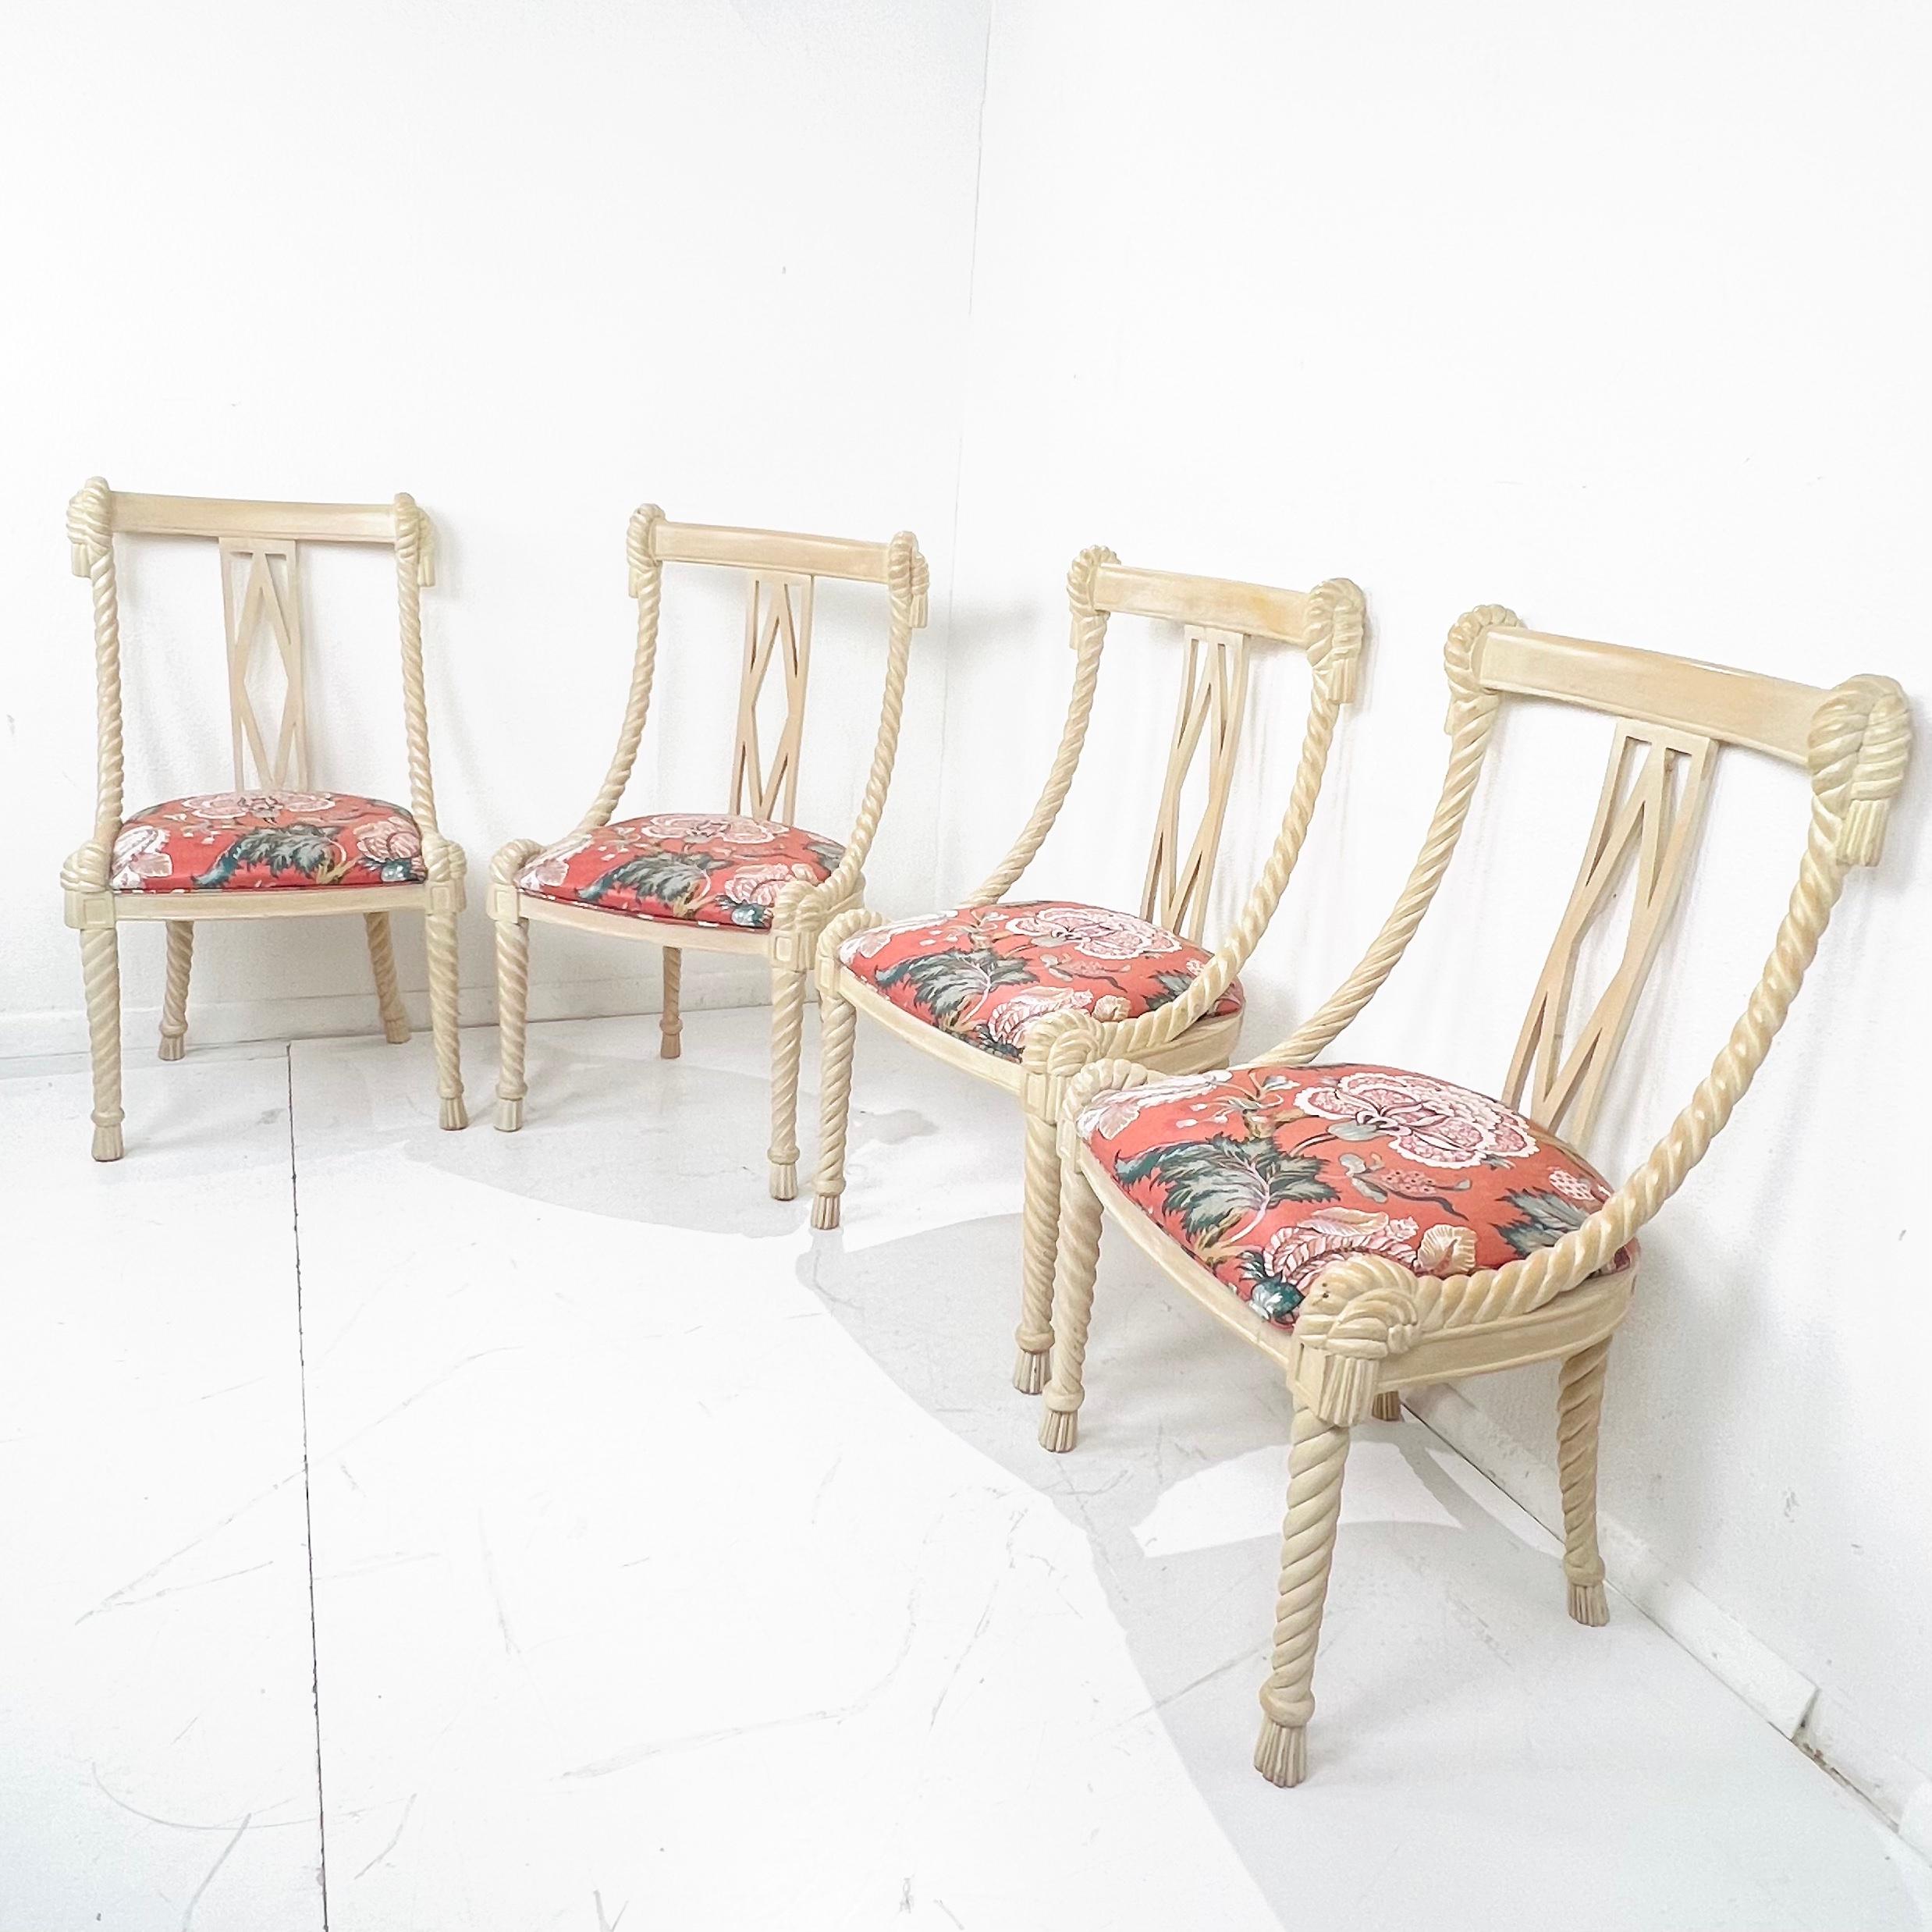 Set of four carved wood dining chairs by Andre Originals. Rope form legs and tassel feet with knotted seat corners, swaged sides rise up to knotted and tasselled seat back corners. Open back with elongated diamond shape centre. Floral upholstered